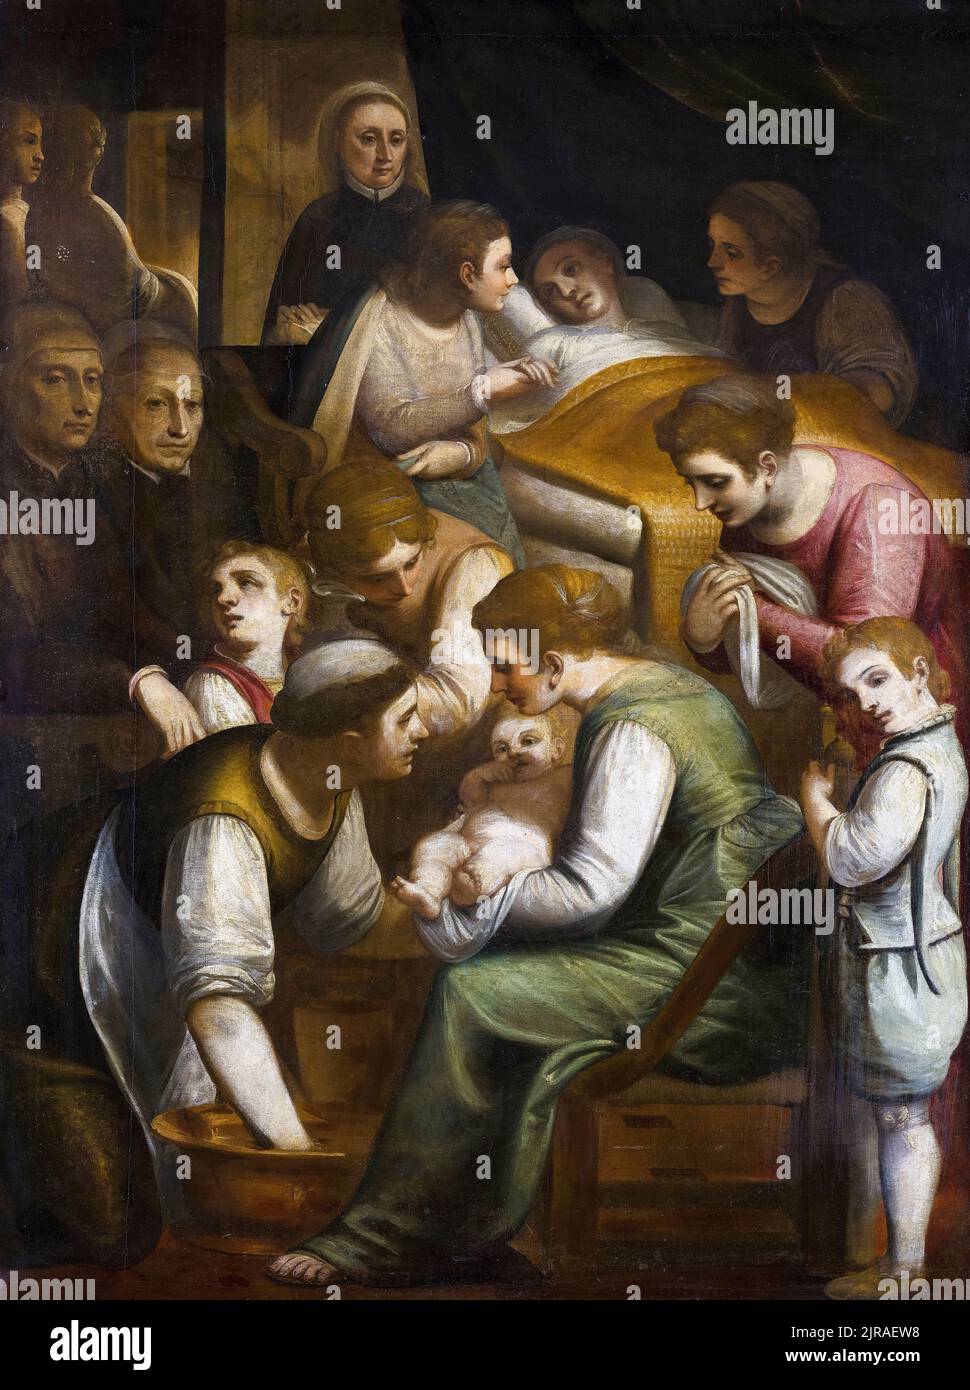 The Birth of Mary, painting in oil on canvas by Luca Cambiaso, circa 1570 Stock Photo